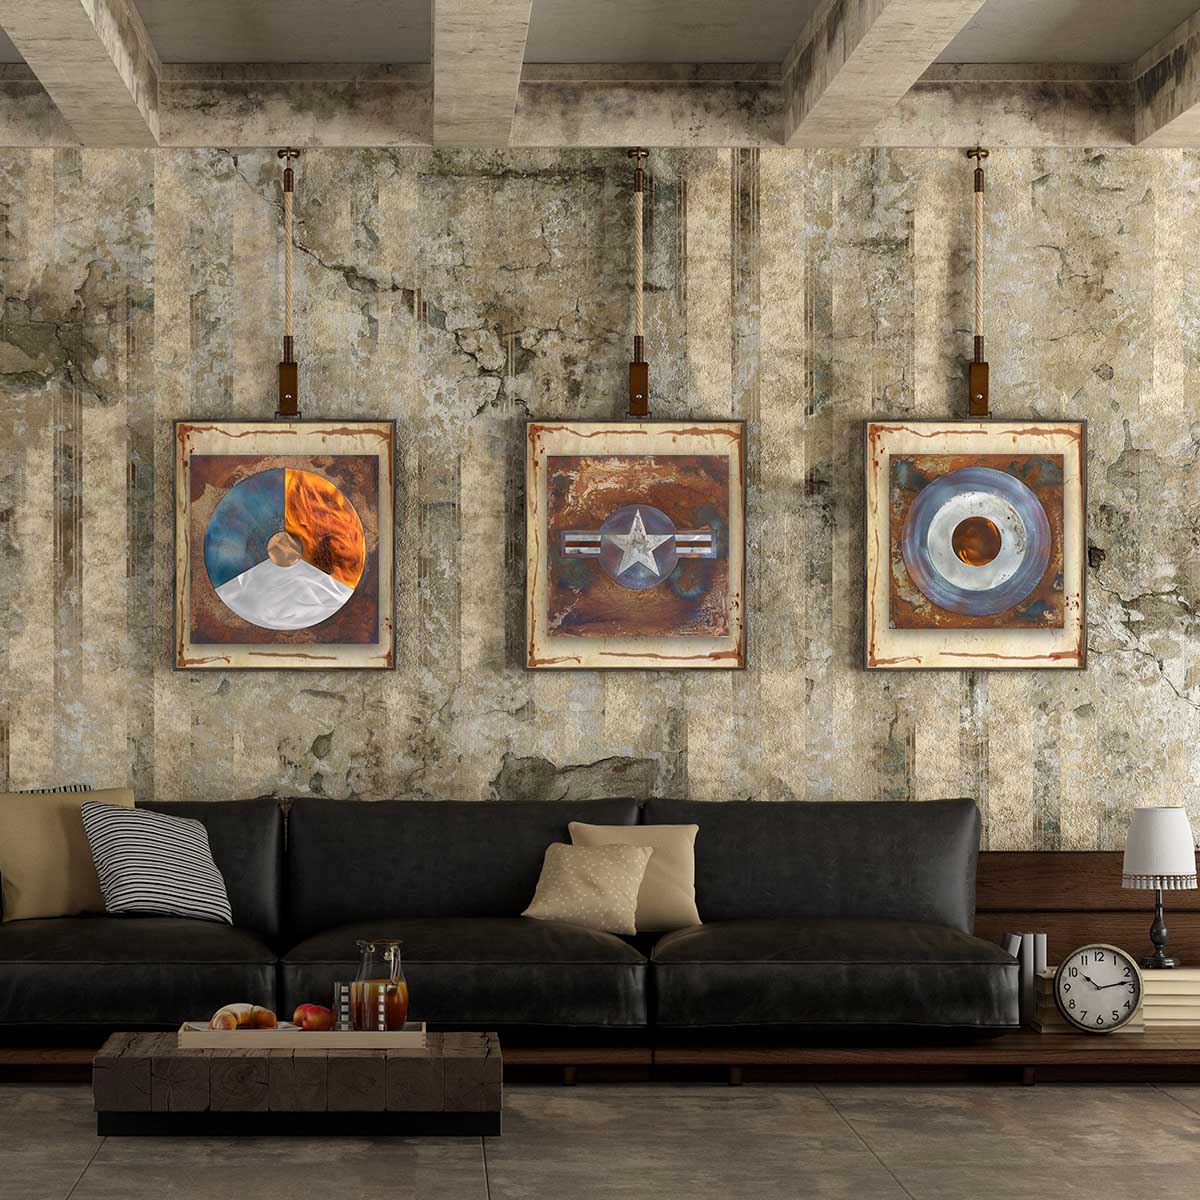 Three steel roundels in a living room.